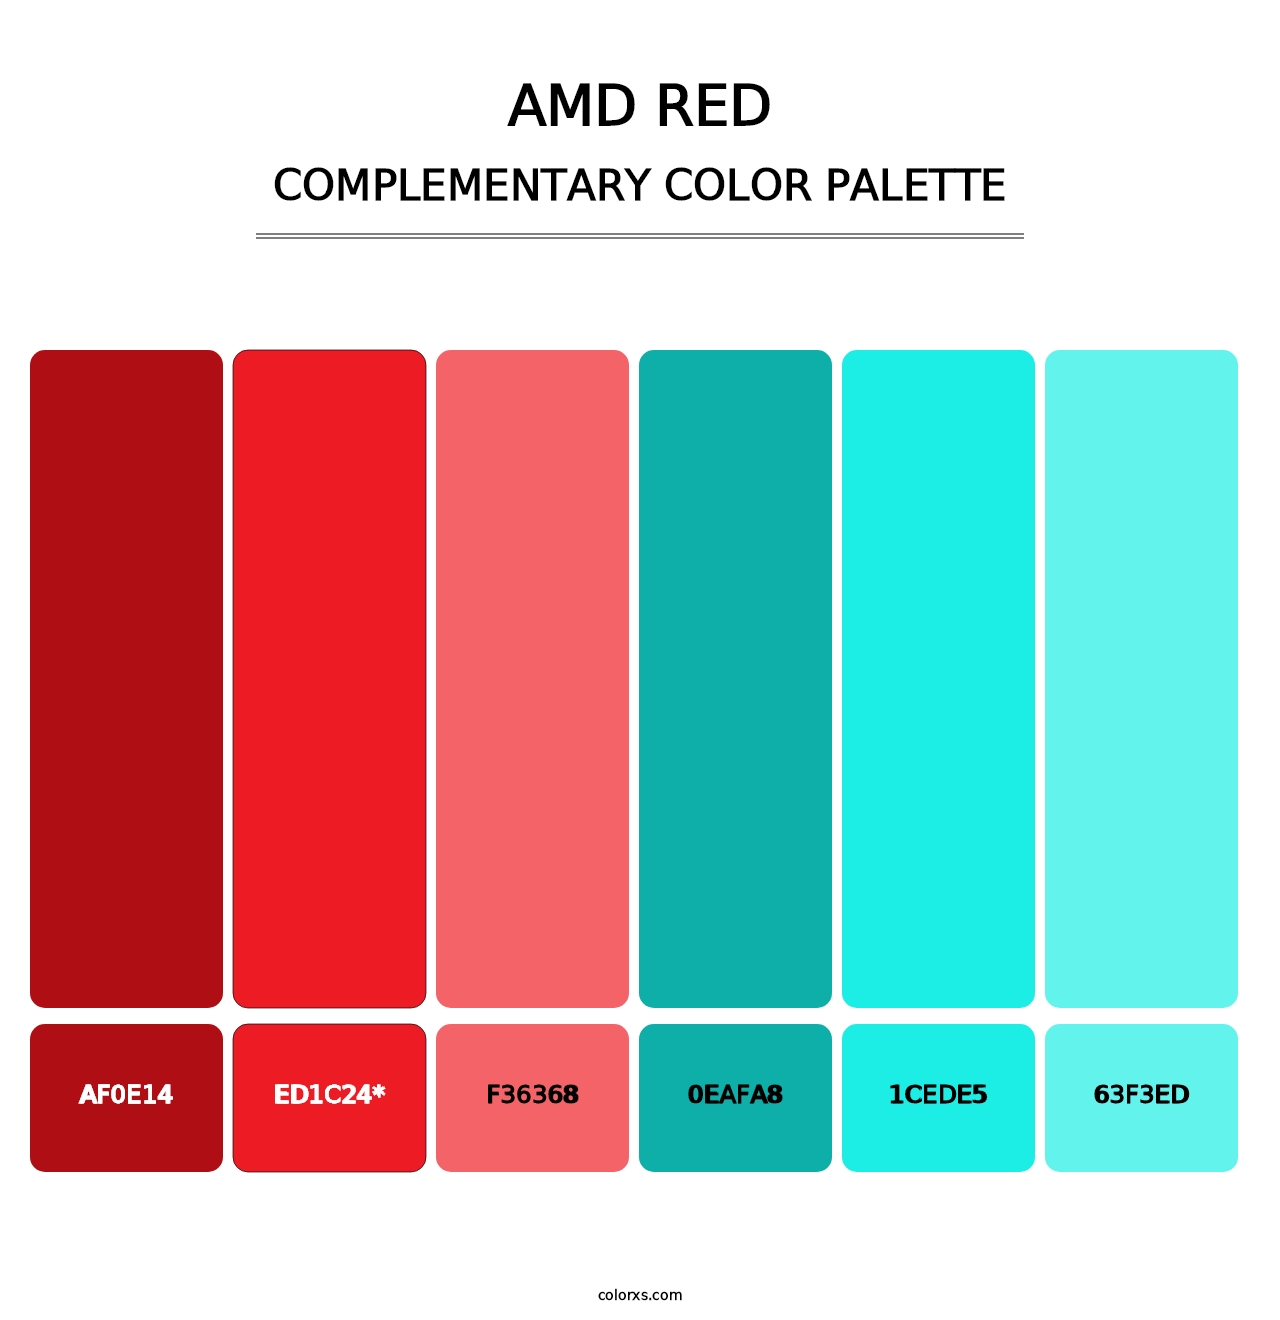 AMD Red - Complementary Color Palette